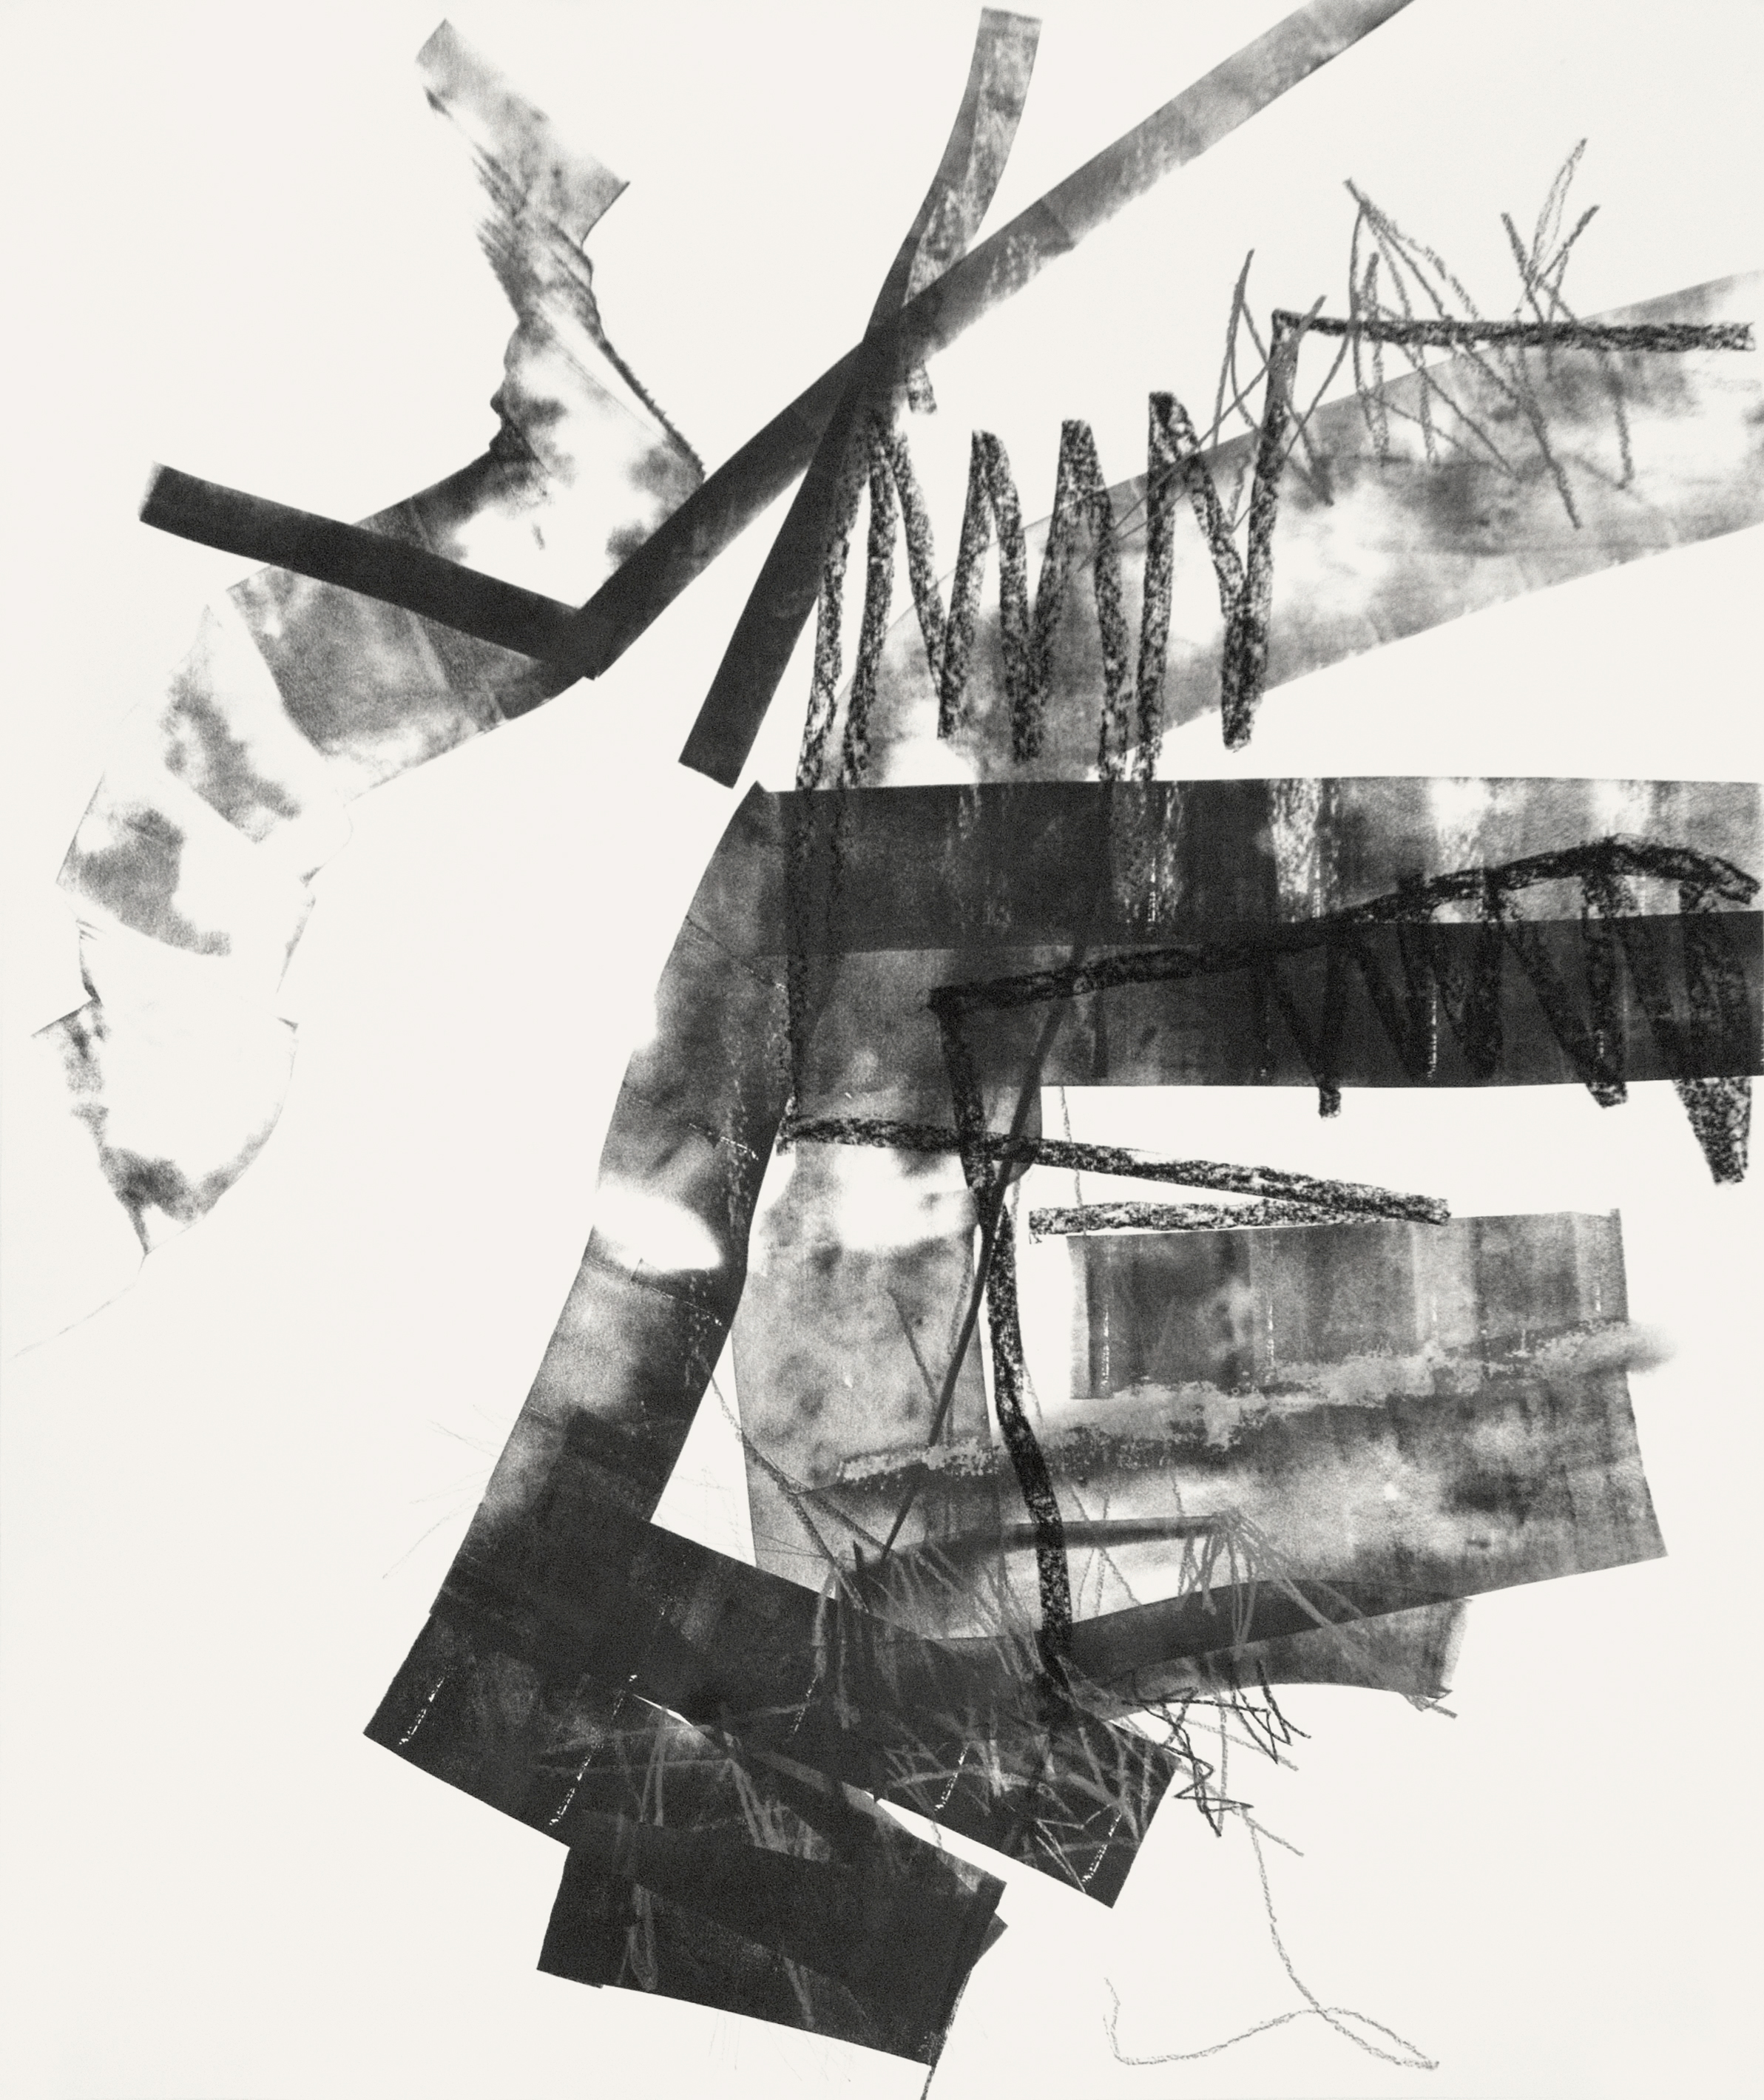   Untitled (rdl.10.3), 2010 ink, charcoal, graphite on paper 50 x 42 inches   